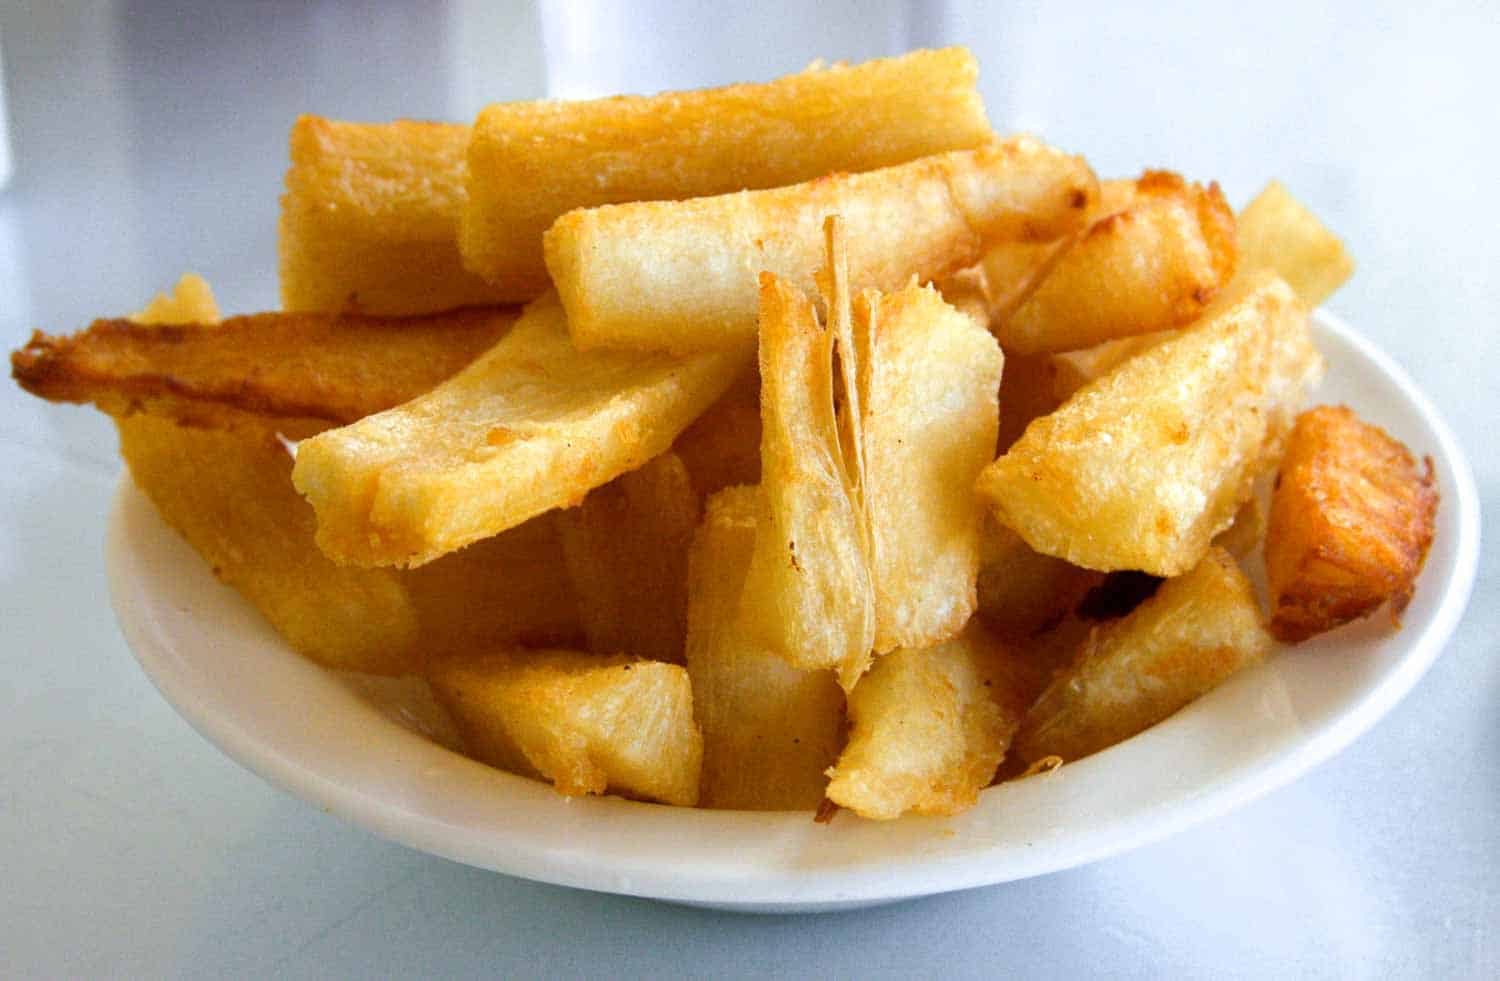 Panama food: yuca frita is fried yuca as known as cassava in some countries.